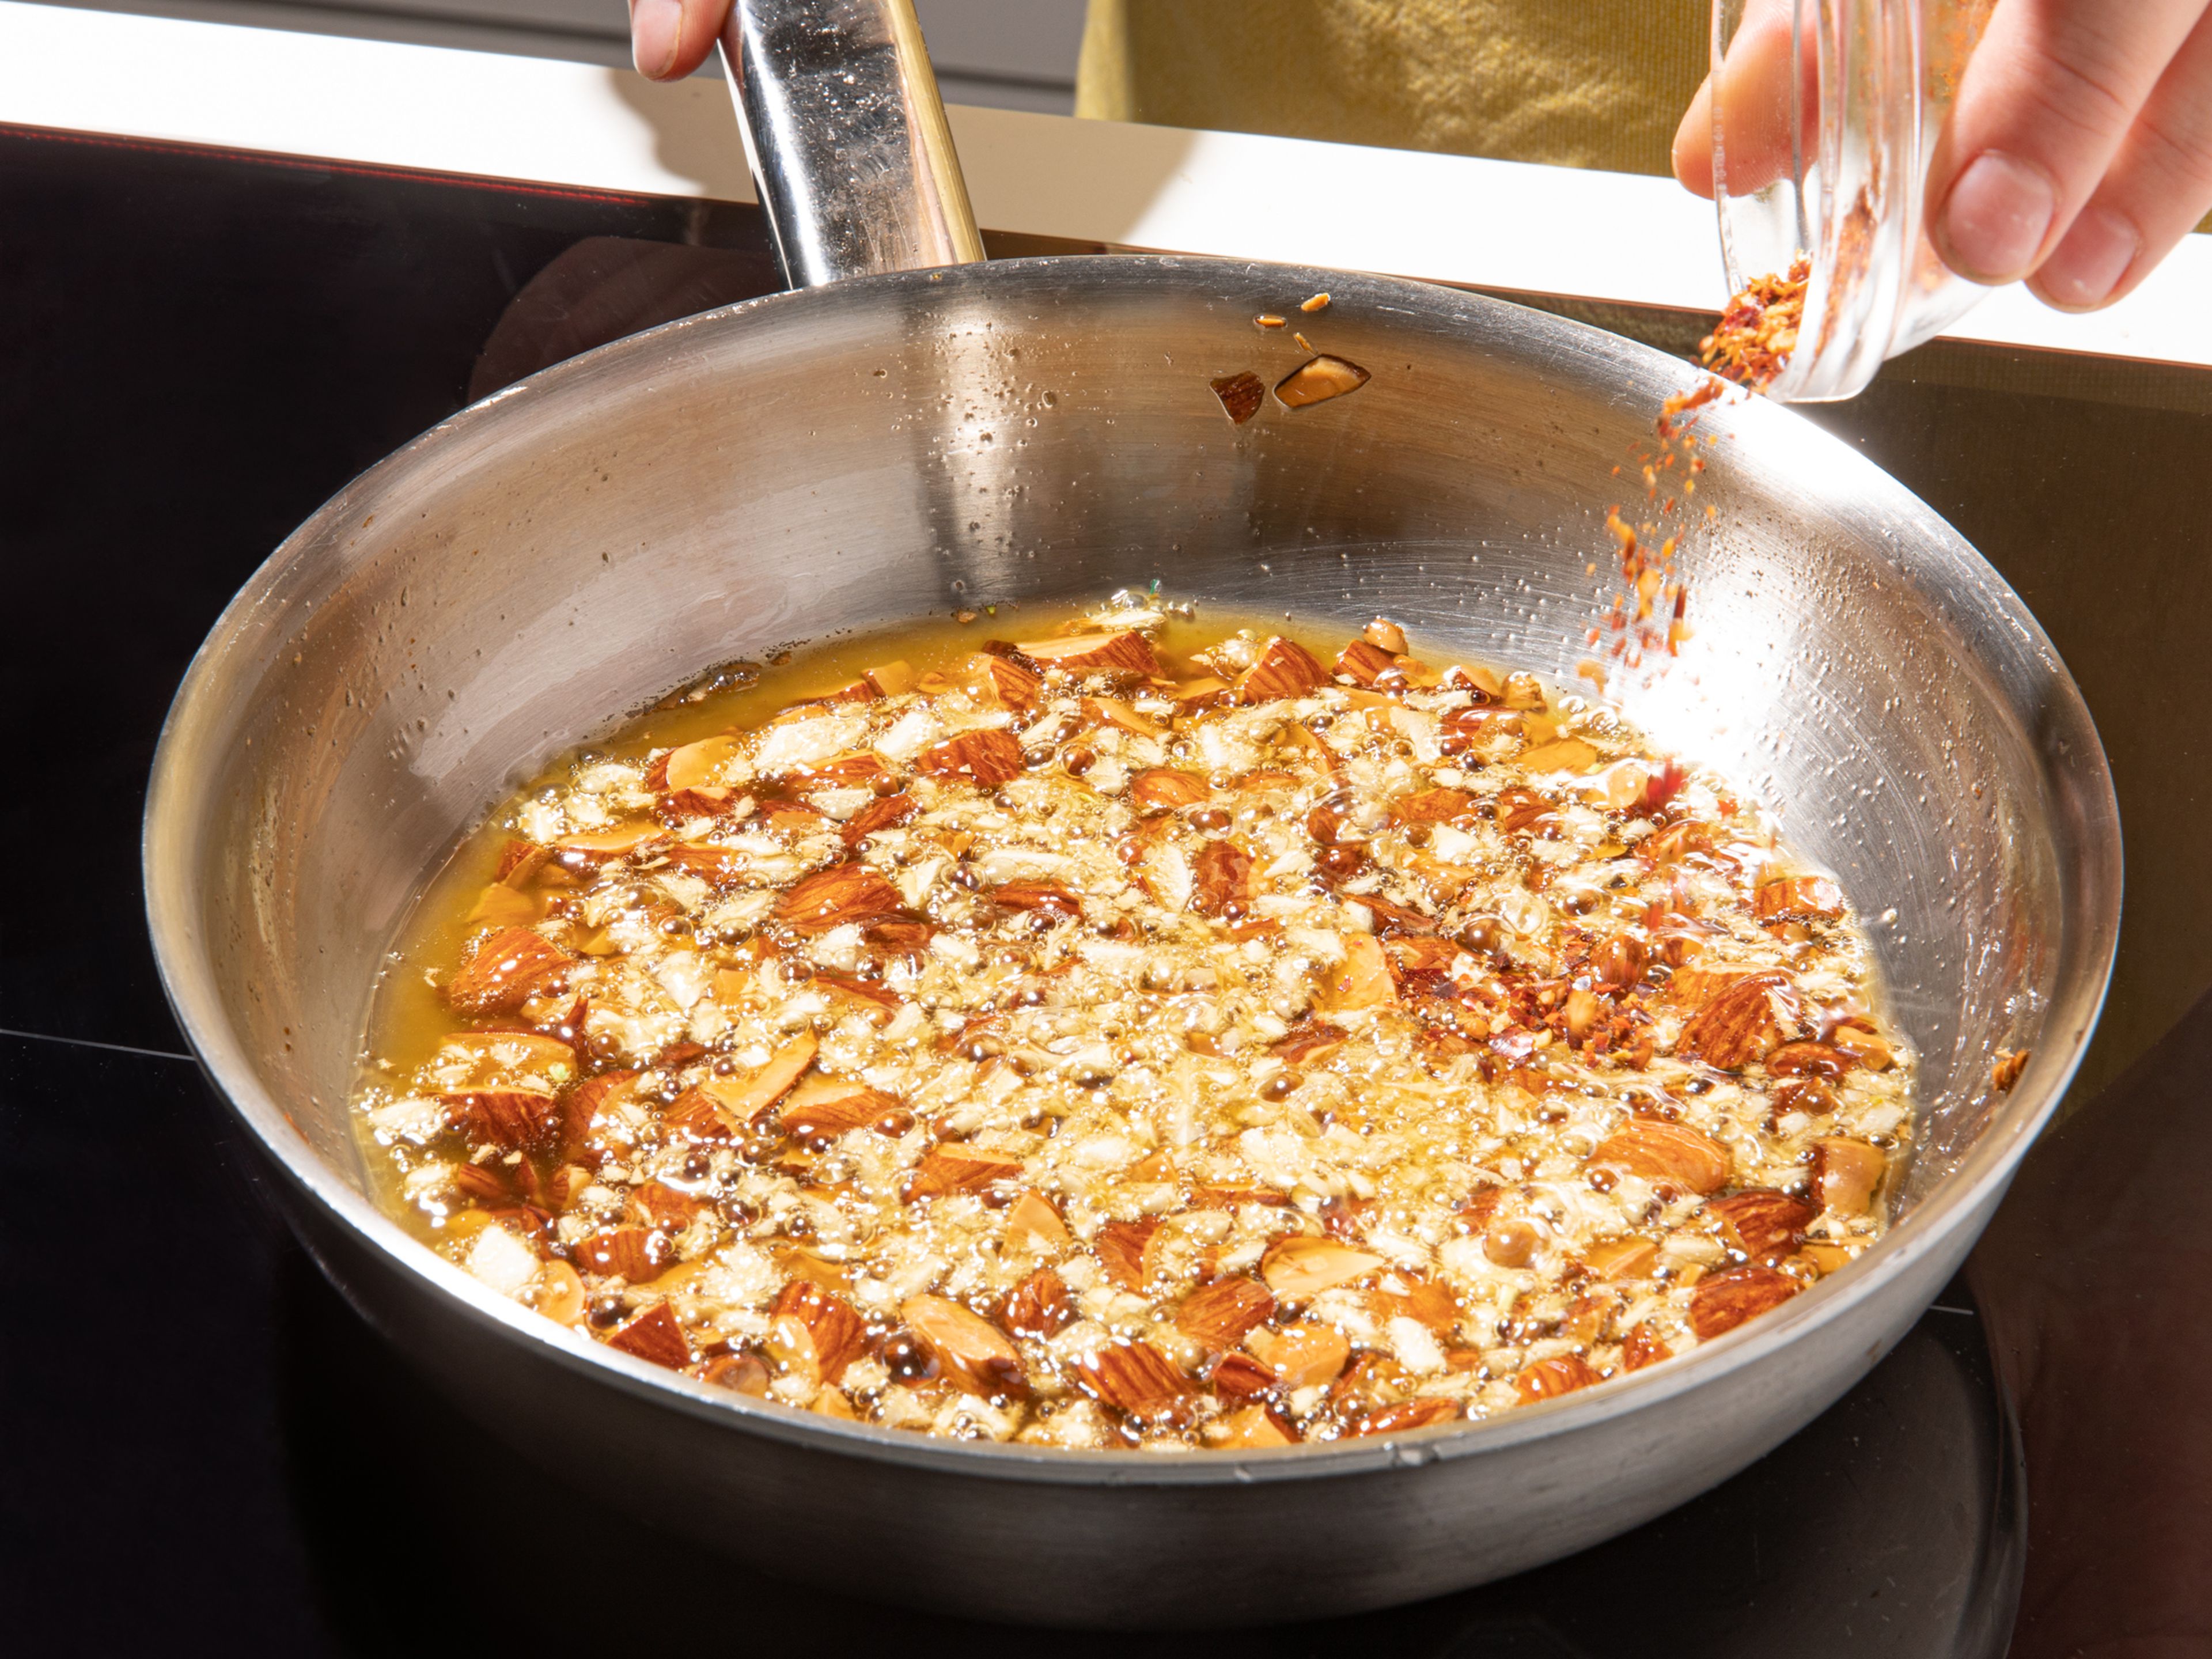 In a frying pan, heat olive oil over medium-high heat. Add almonds and fry until almost golden brown, then add garlic and fry briefly until fragrant and just about to brown. Remove from heat, then mix in cumin and chili flakes. Add salt and pepper, let cool.